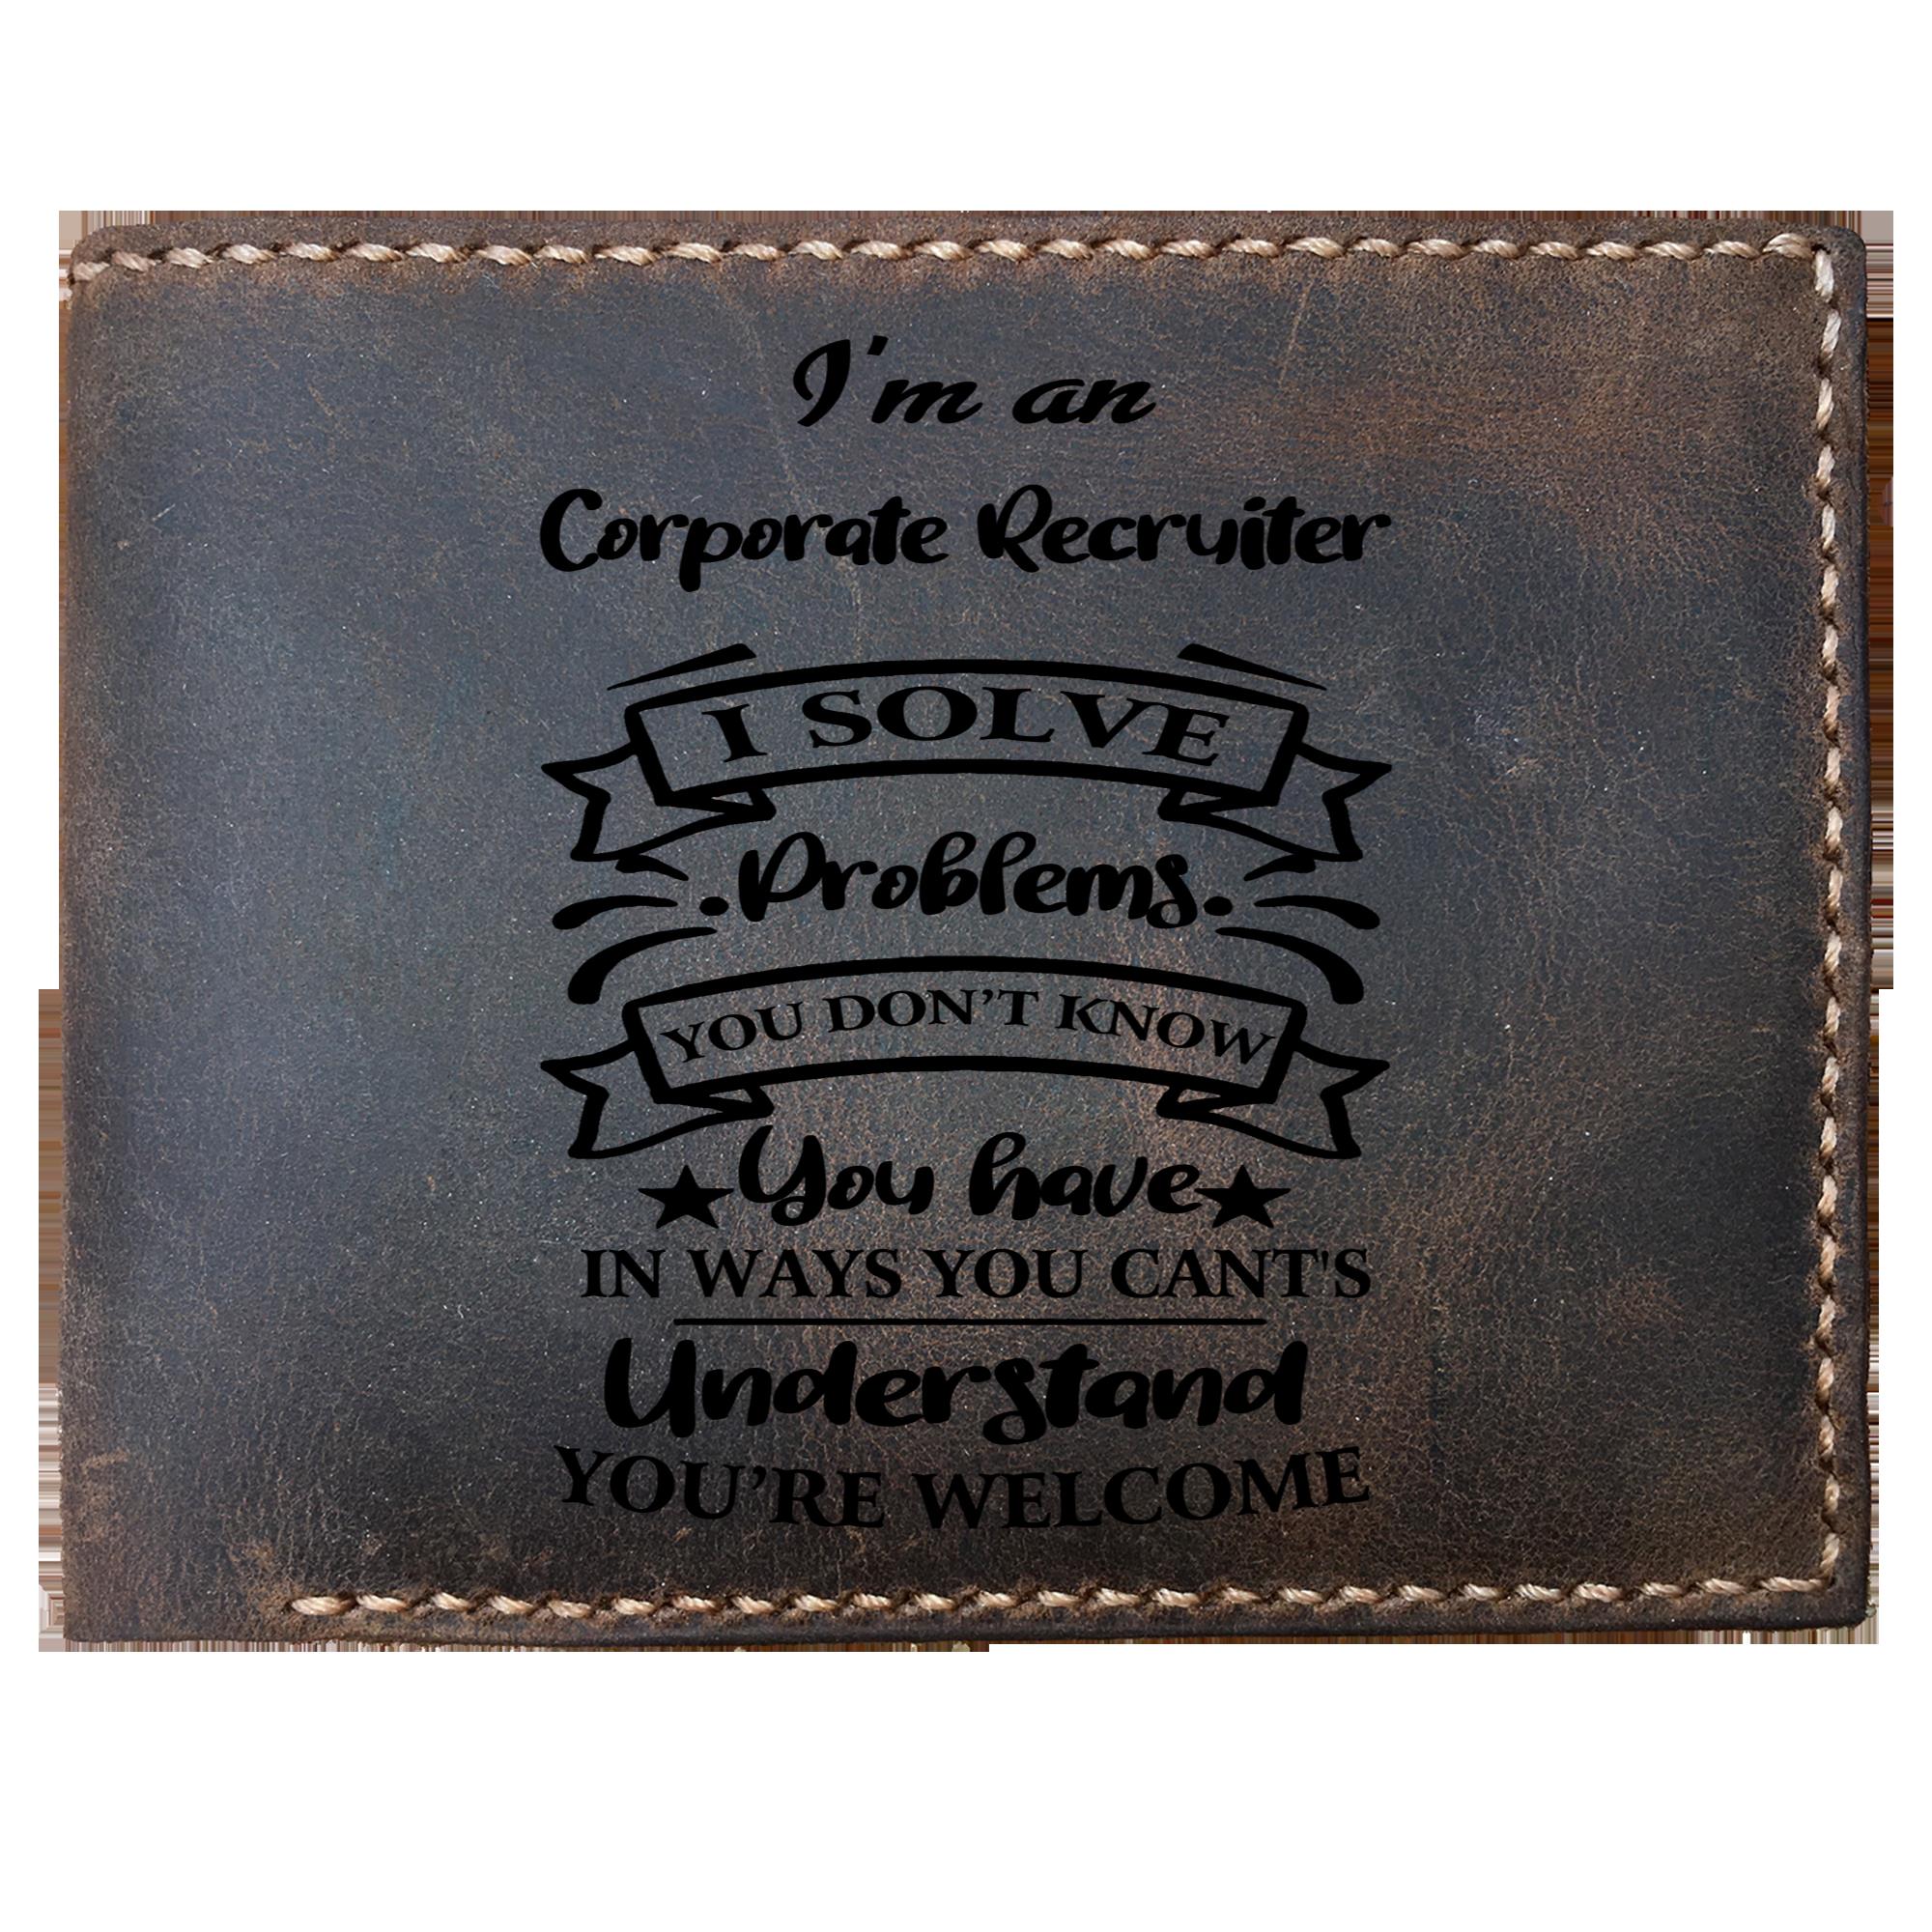 Skitongifts Funny Custom Laser Engraved Bifold Leather Wallet For Men, I'm an Corporate Recruiter Solve Problems, Father's Day Gifts